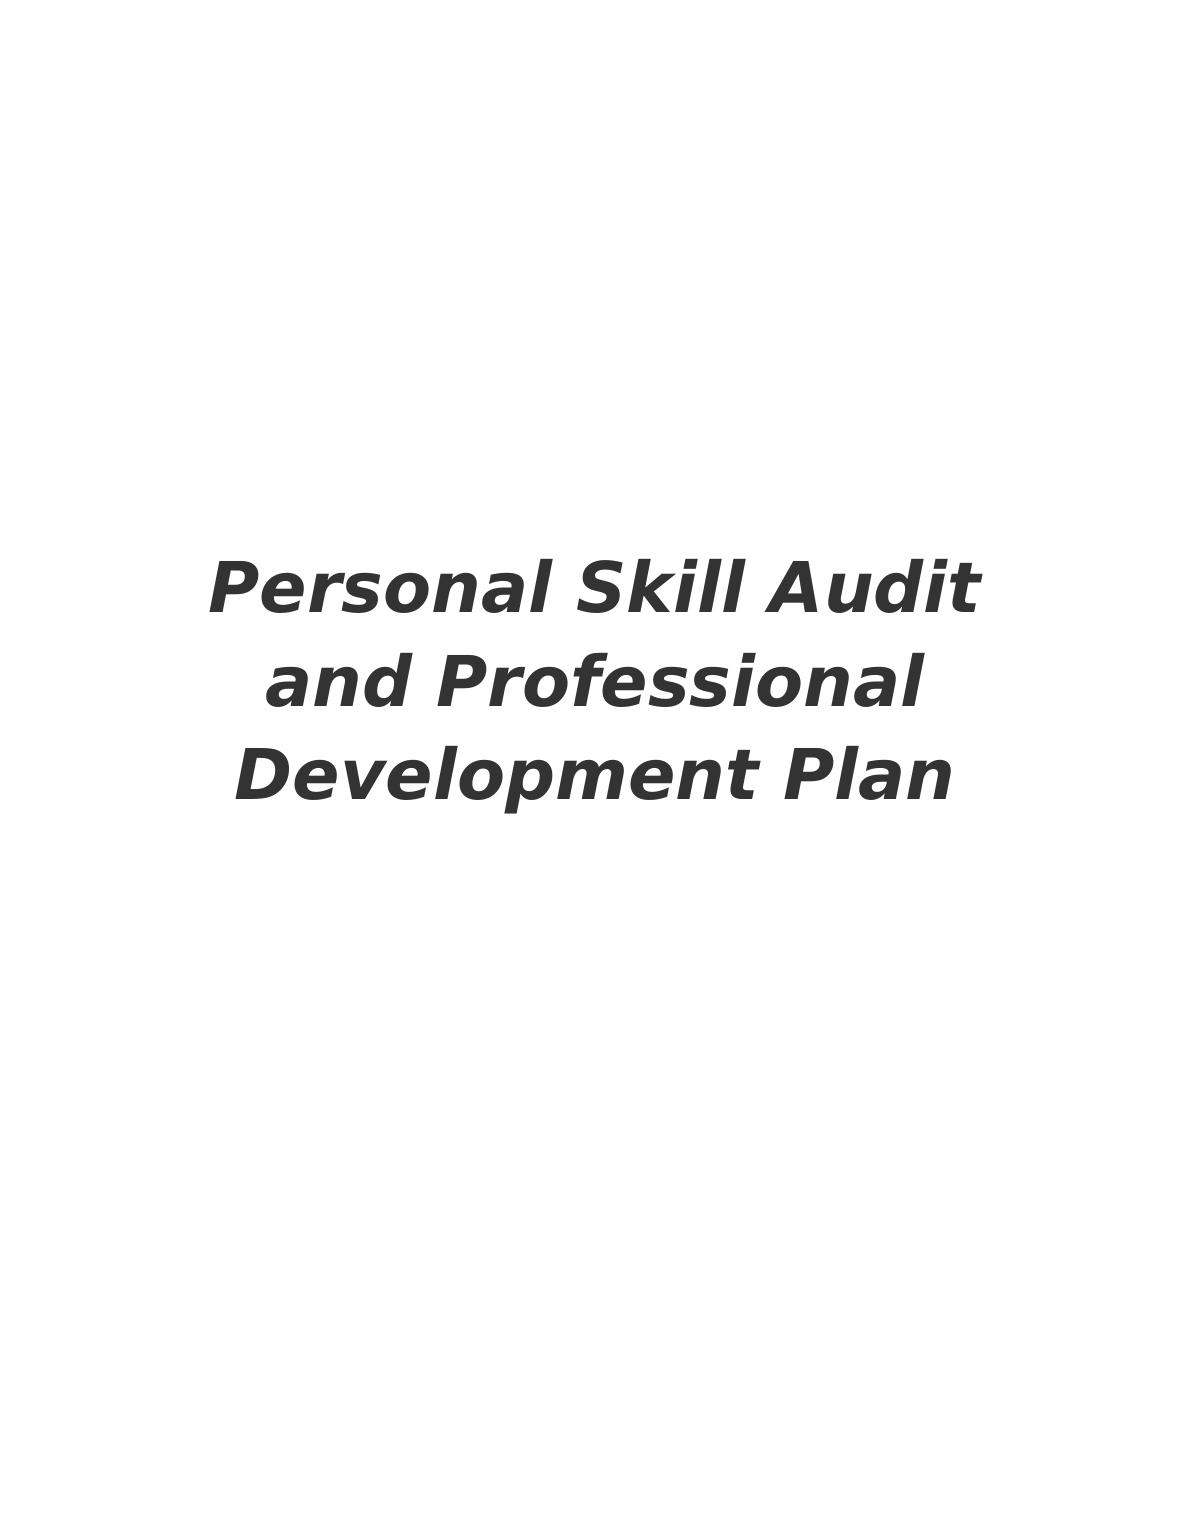 Personal Skill Audit and Professional Development_1